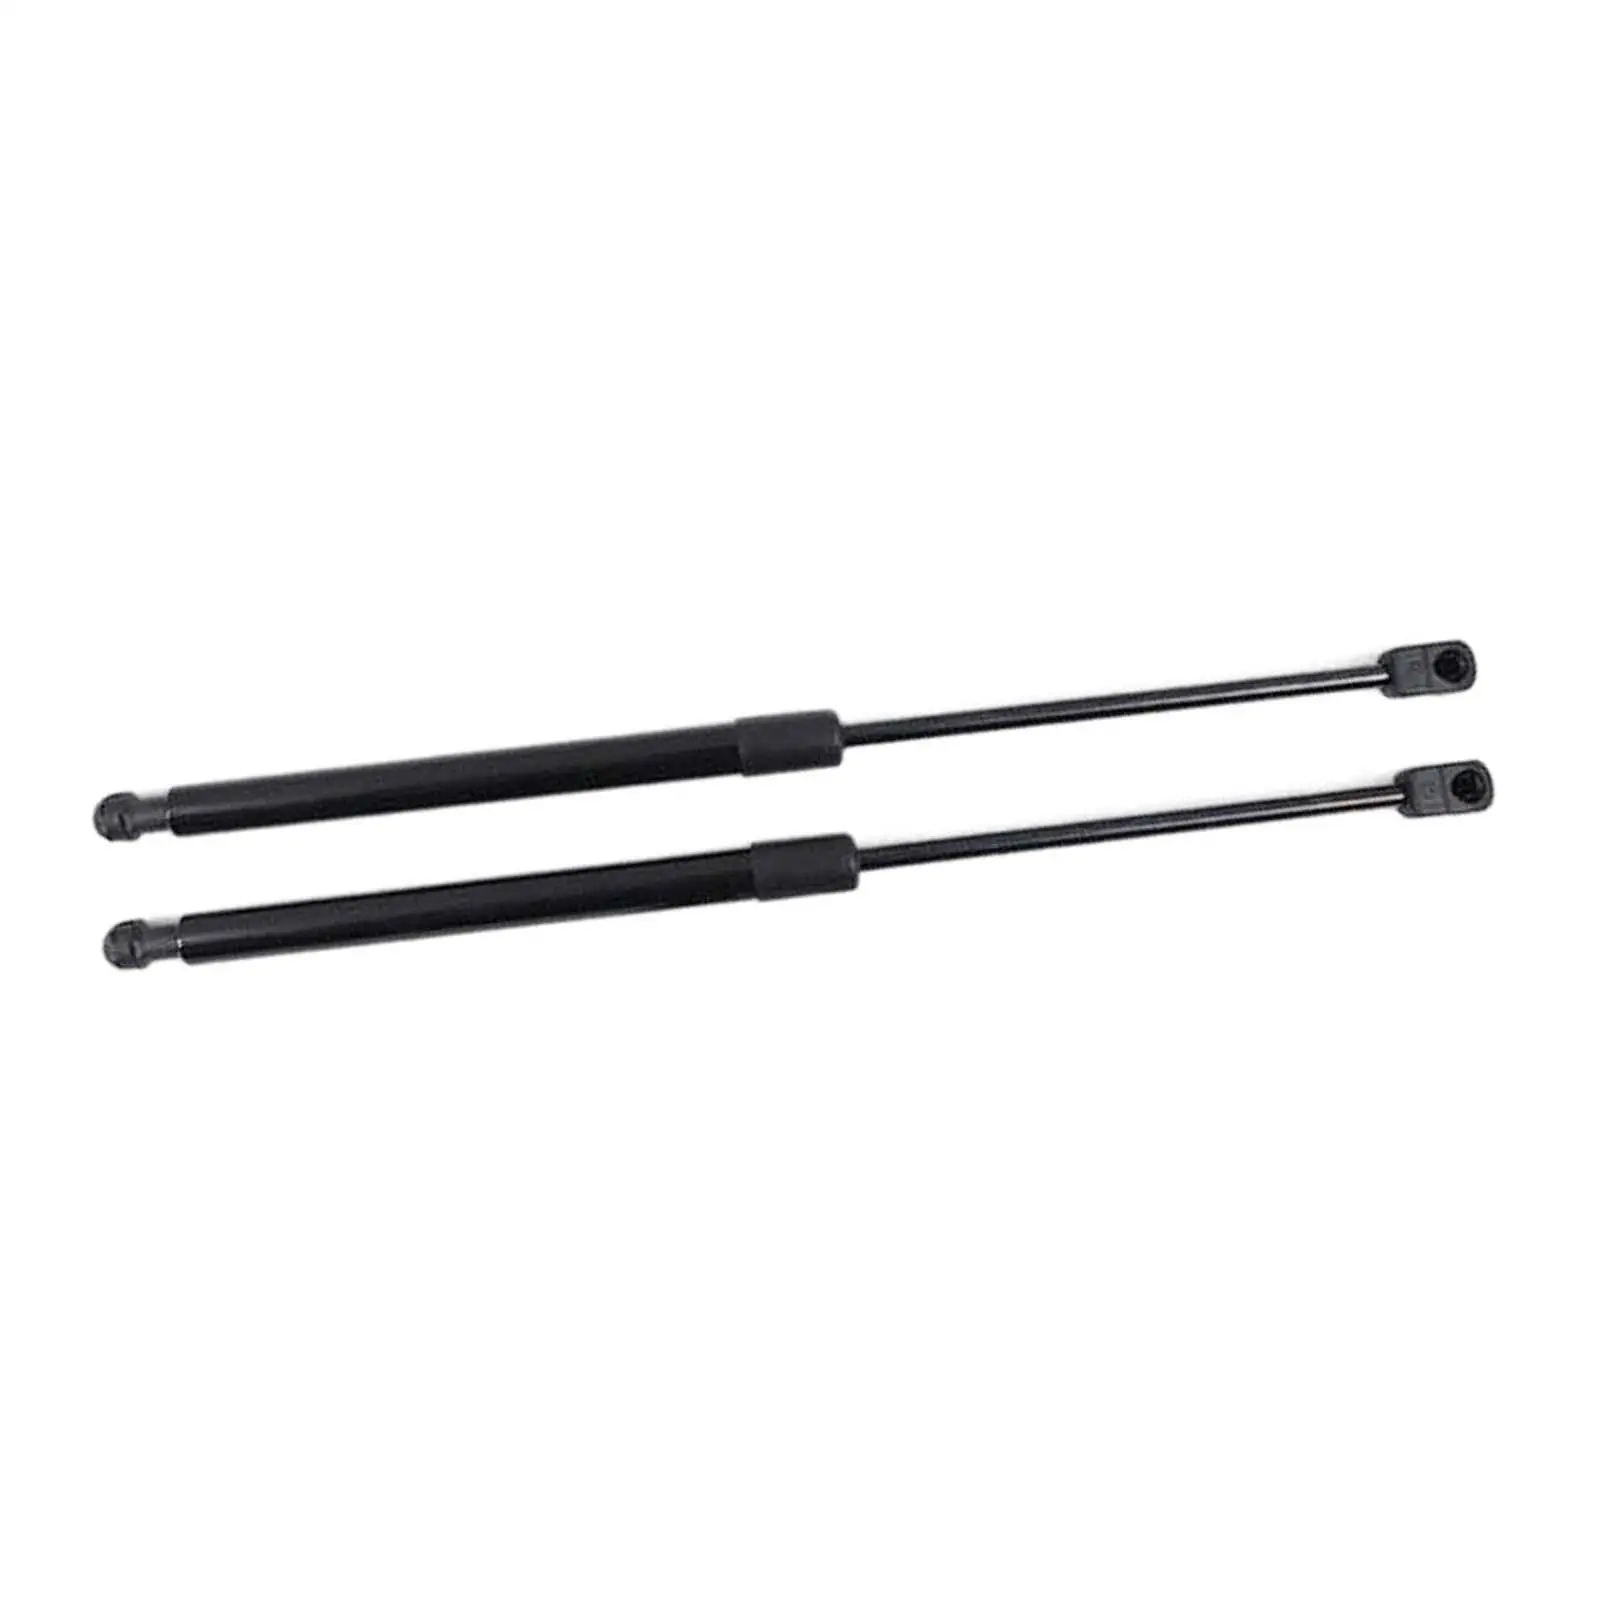 Car Front Bonnet Struts Durable Carbon Steel Hood Lift Support Shocks Holder for Byd Atto 3 Replacement Parts Accessory